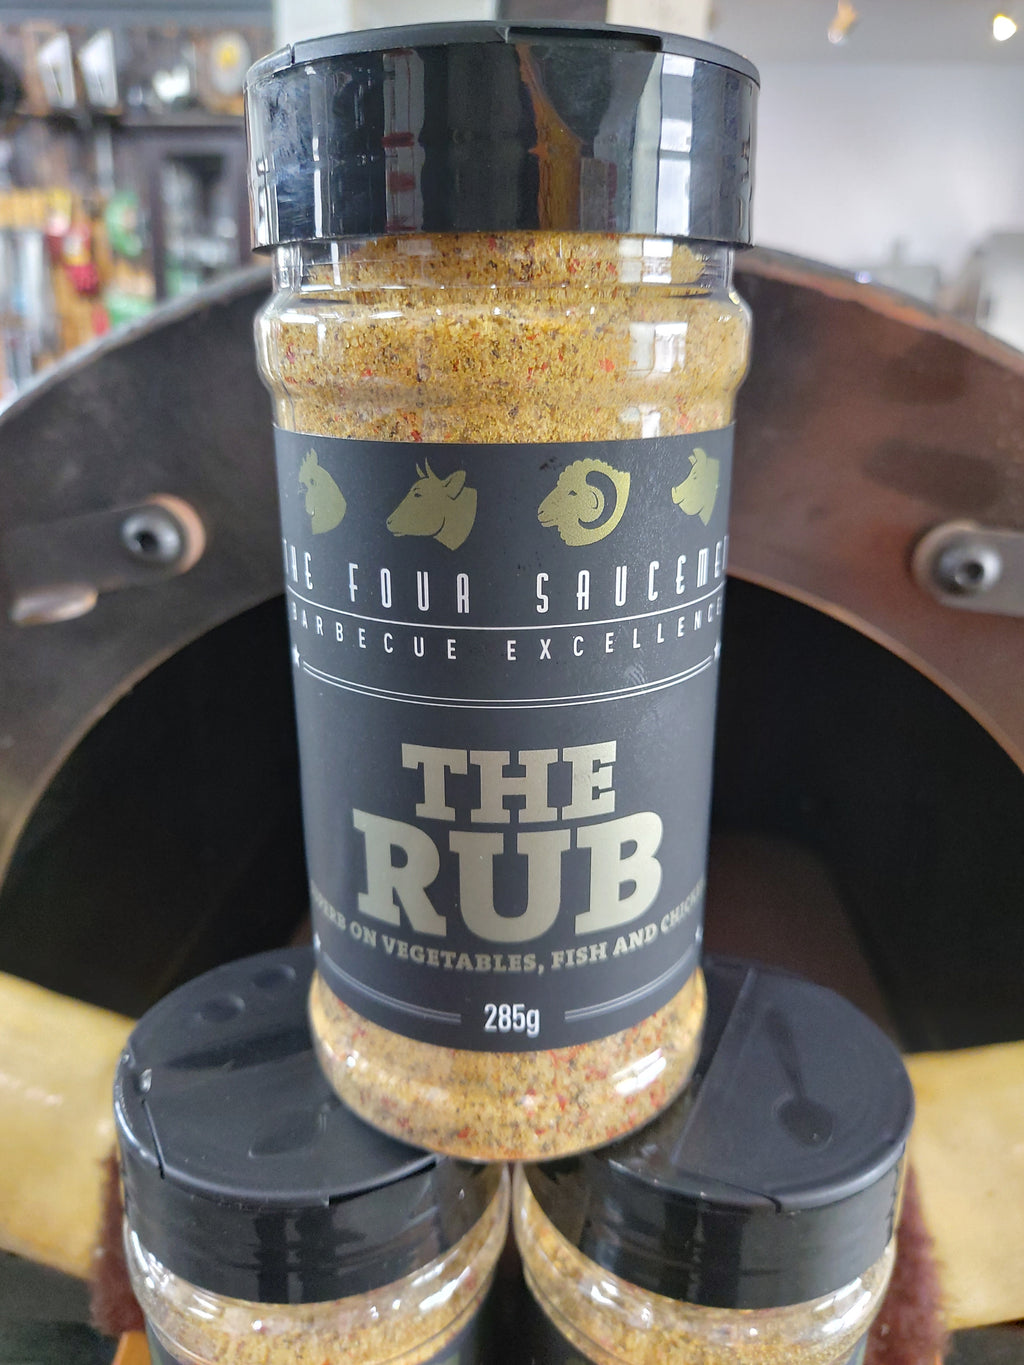 The Rub 285g by The Four Saucemen